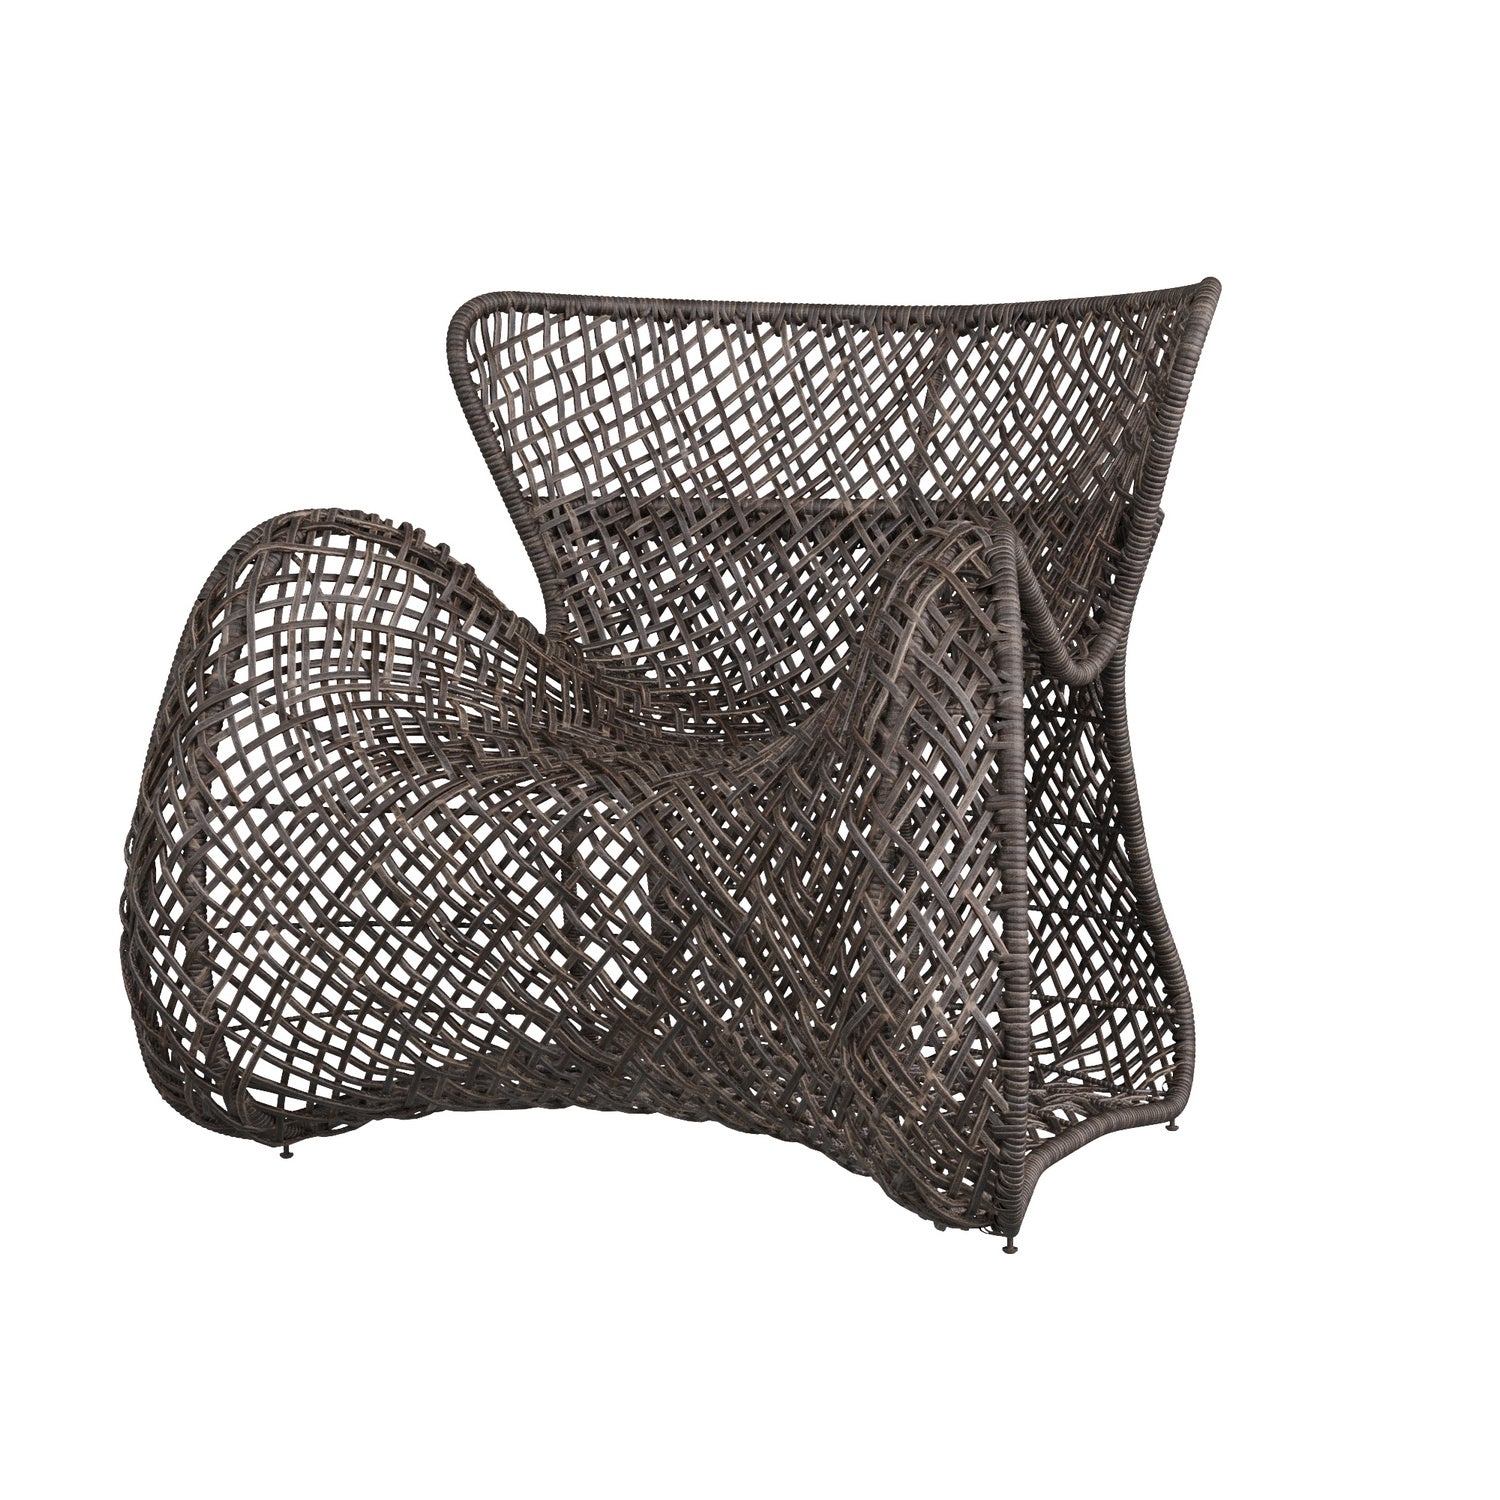 Lounge Chair from the Sojourner collection in Dark Gray Wash finish